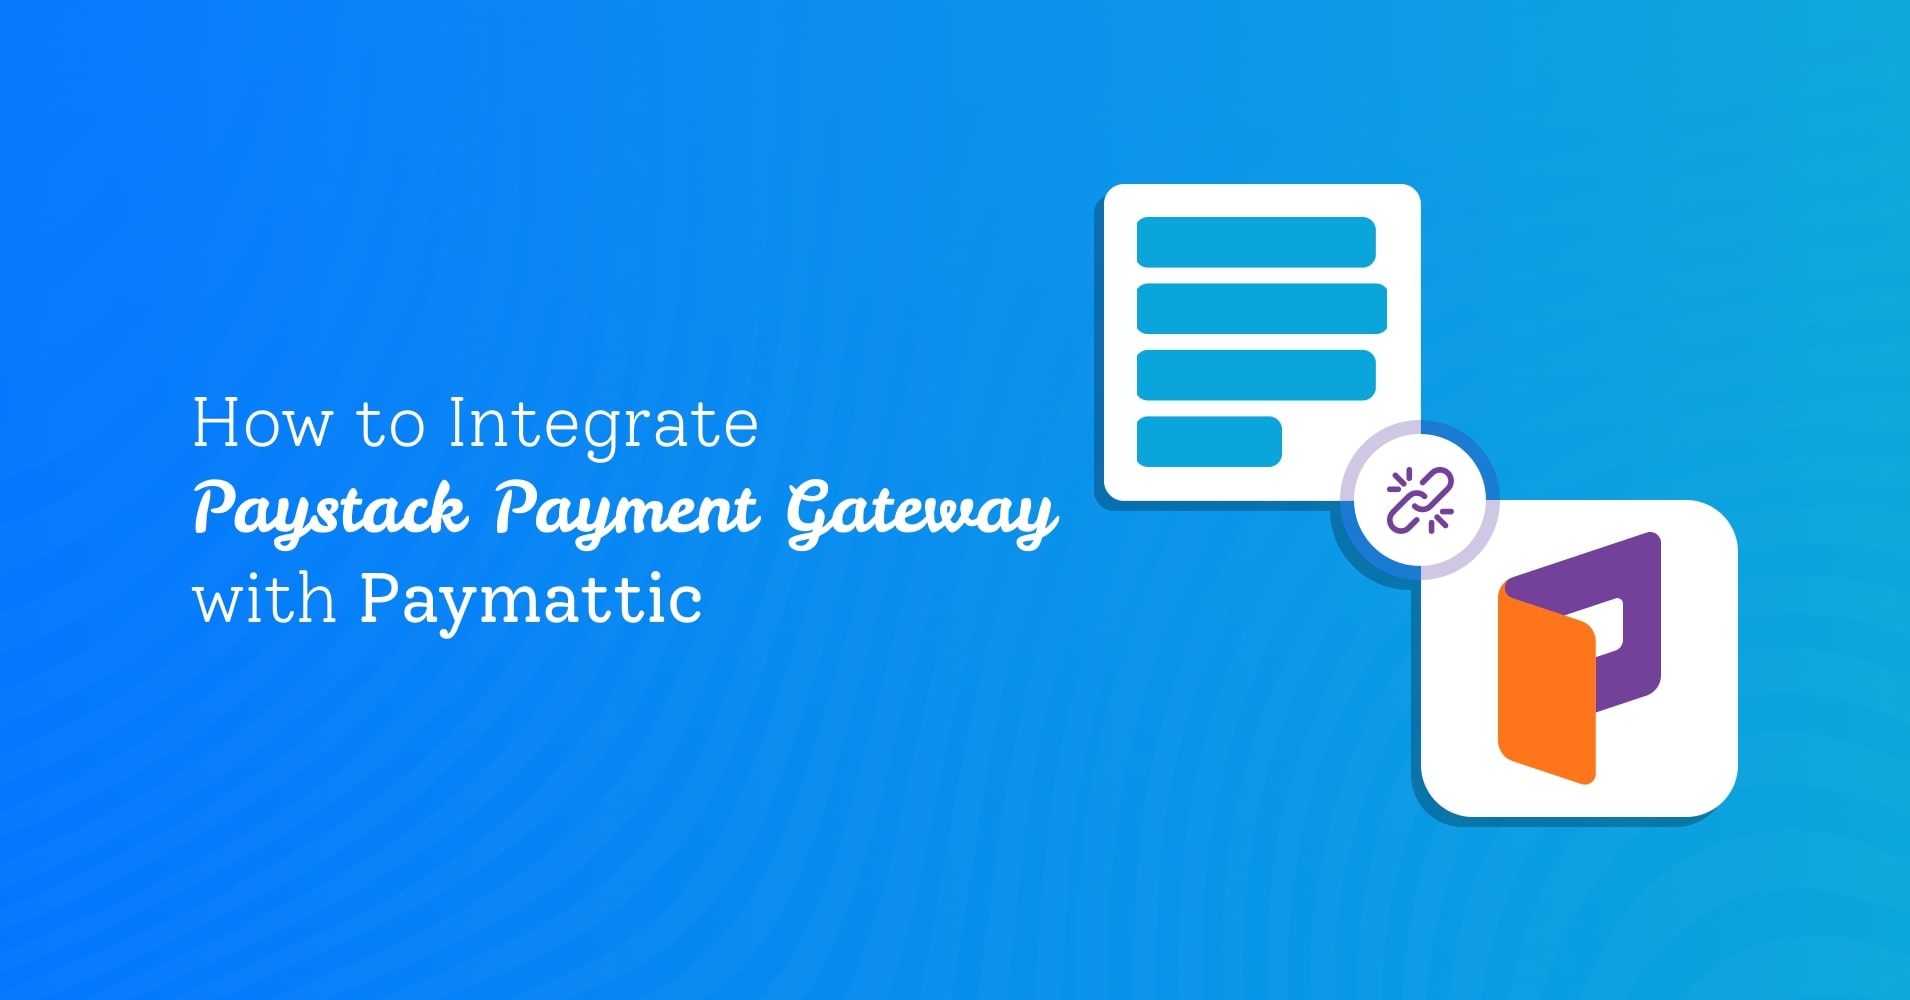 How to Integrate Paystack Payment Gateway with Paymattic?